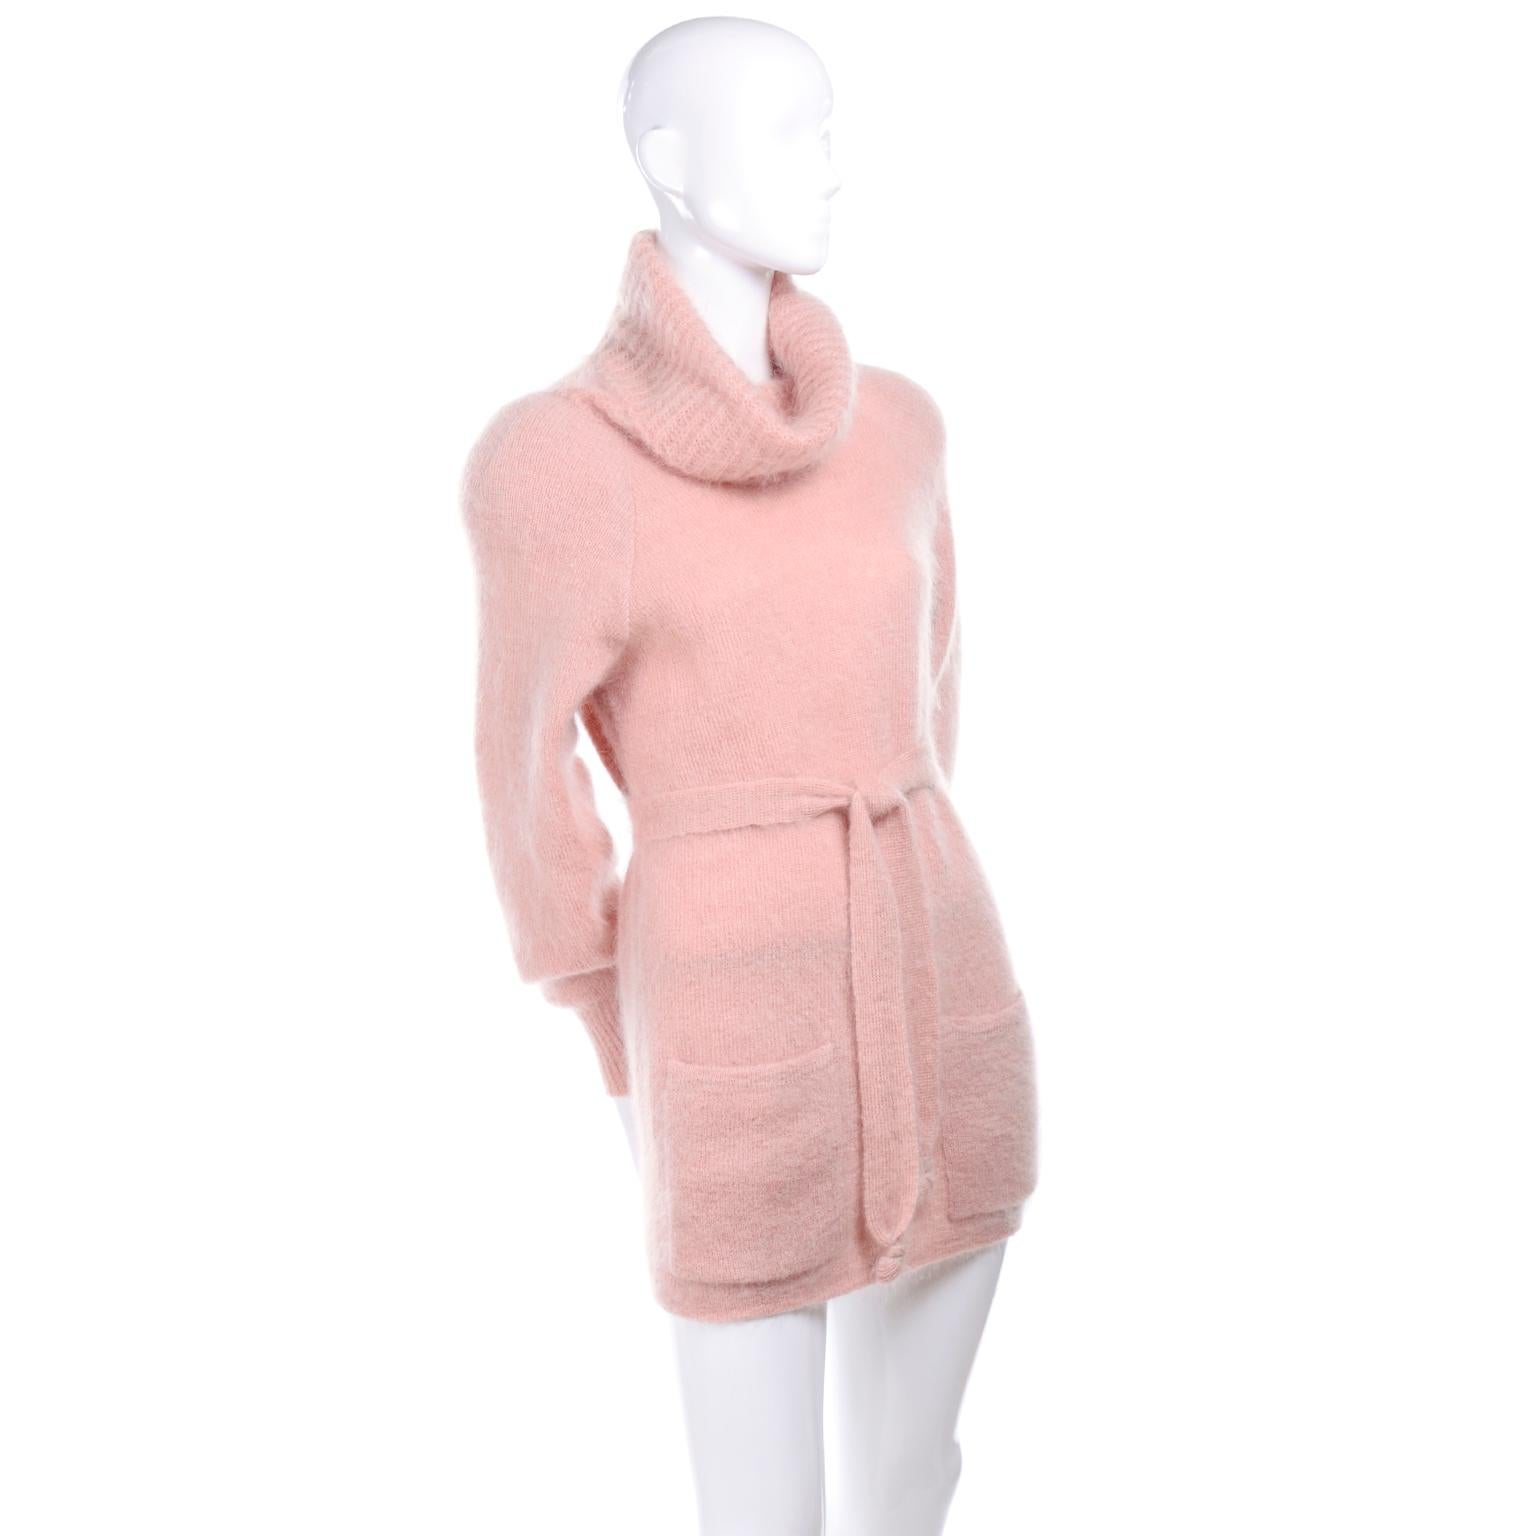 Women's 1970s Anne Klein Pink Mohair Cowl Neck Sweater With Pockets & Belt Made in Italy